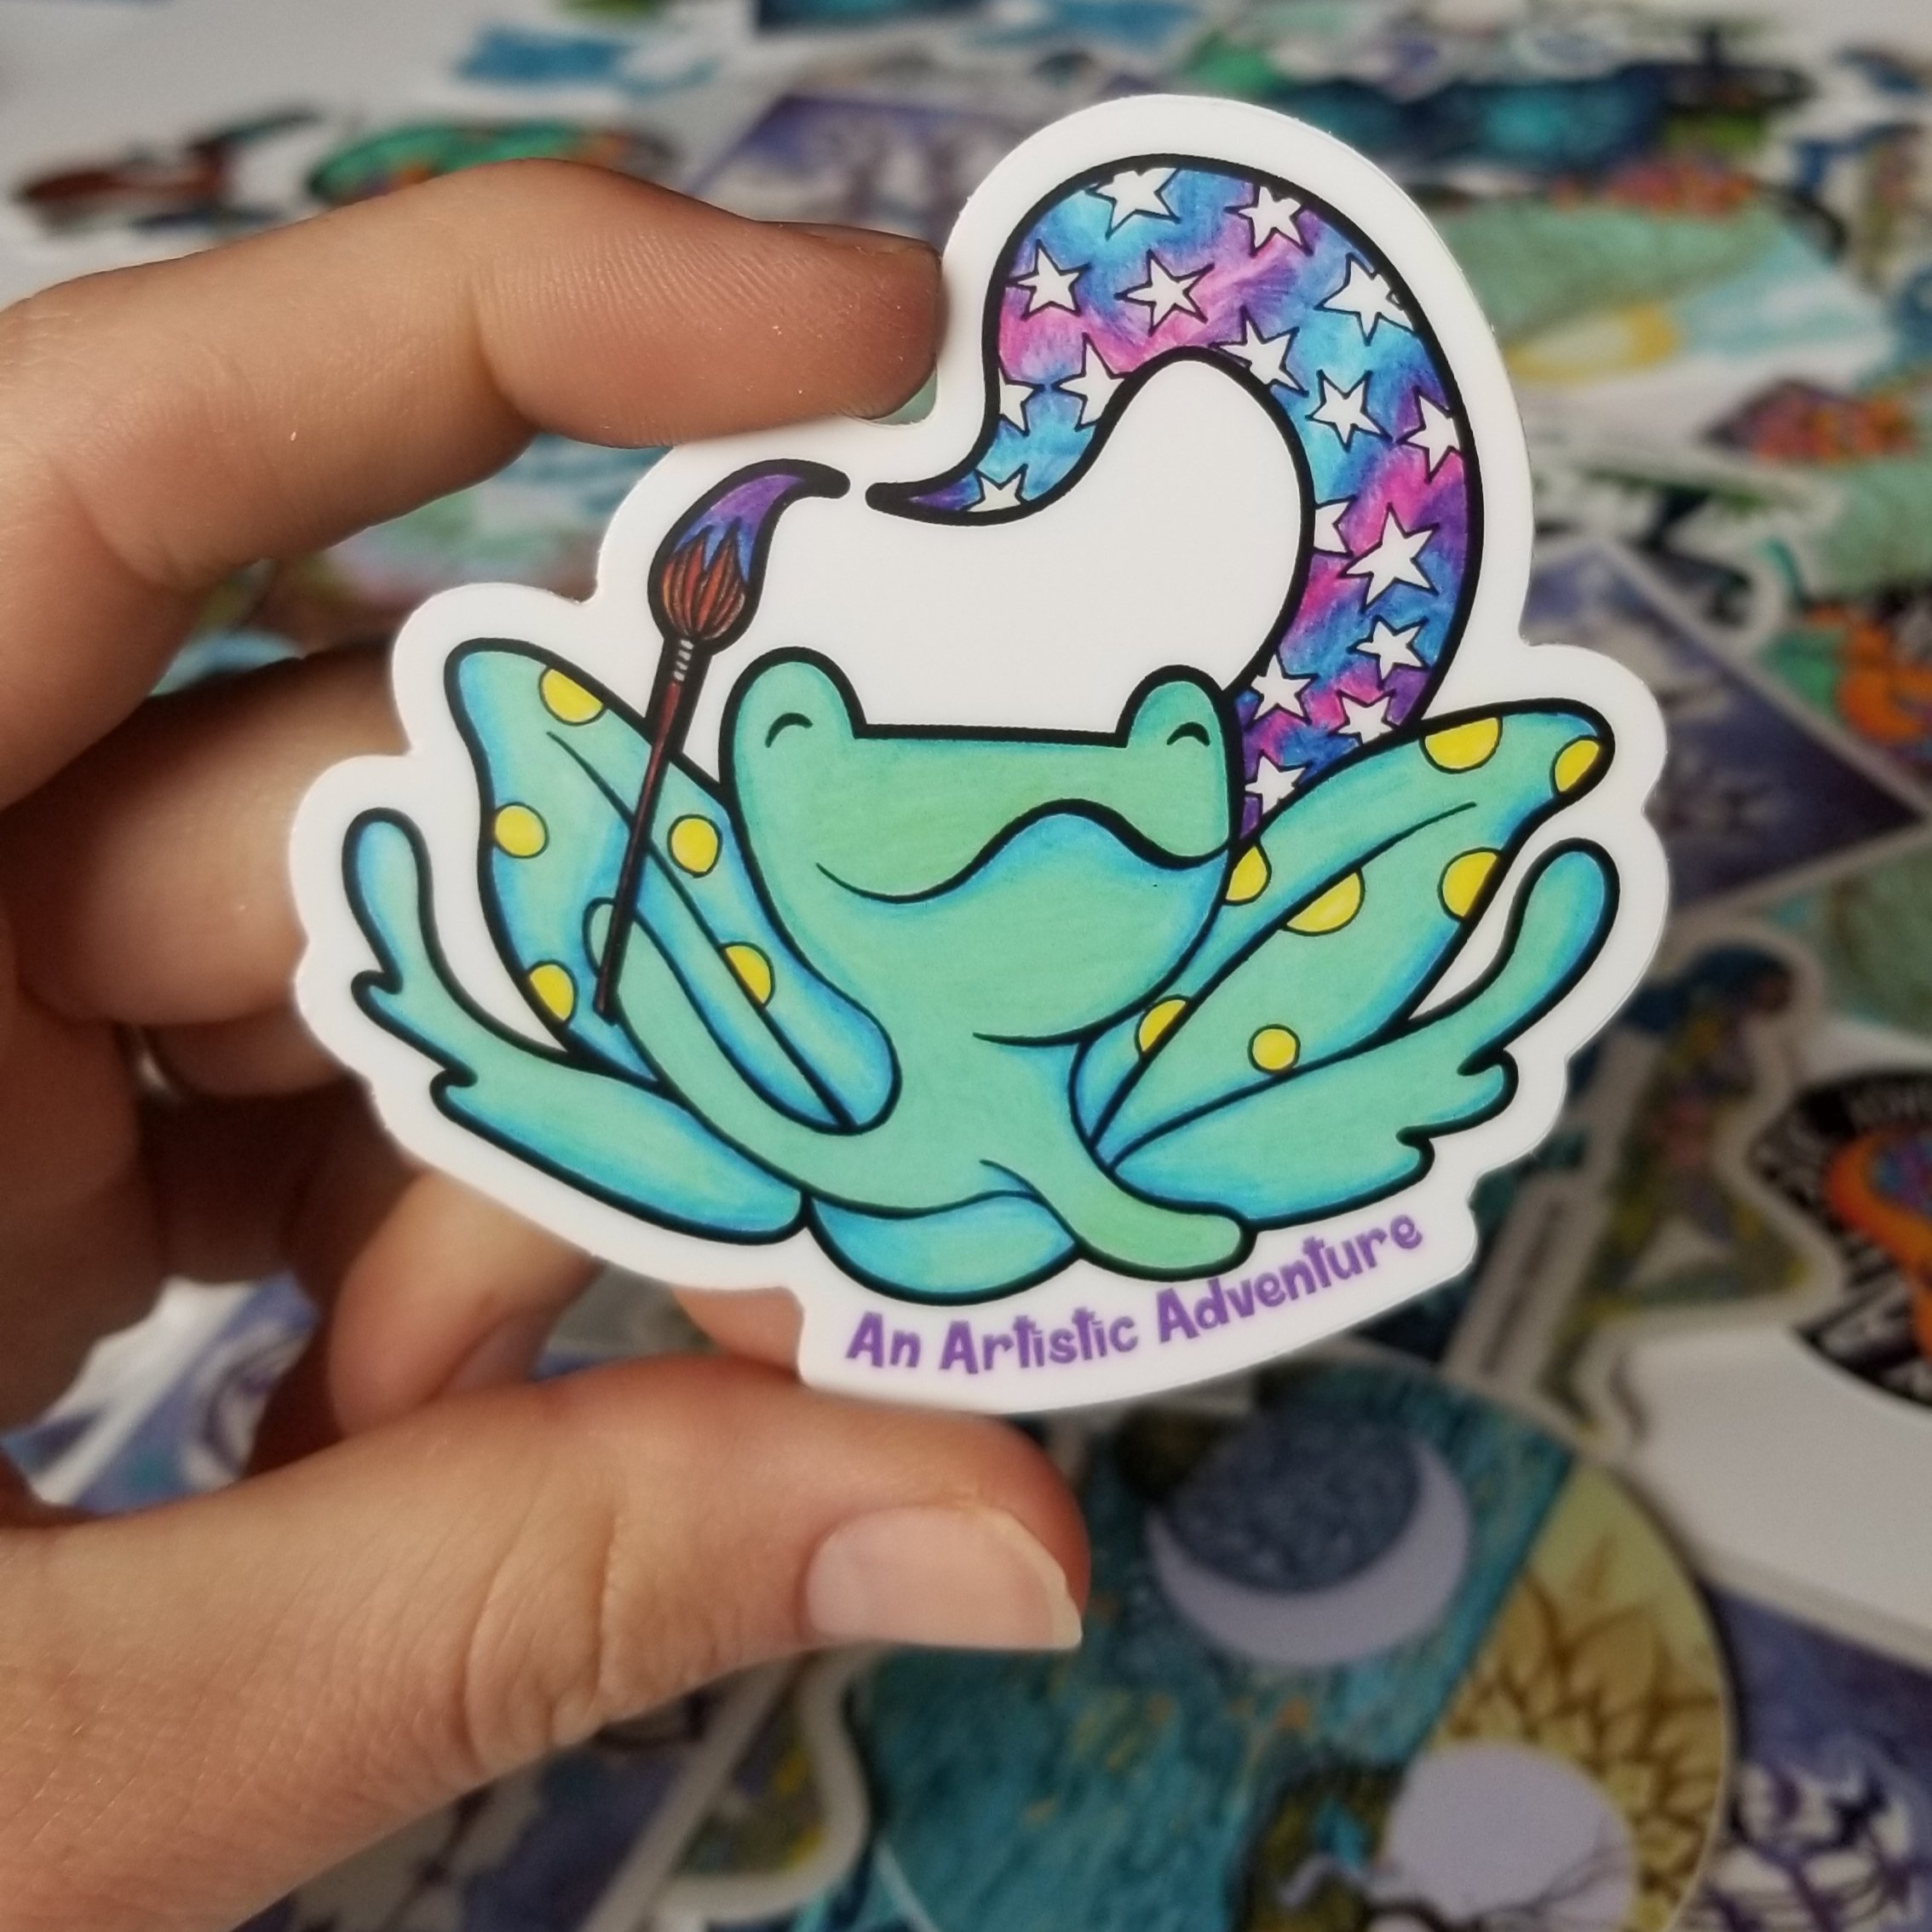 artist-frog-sticker-buy-stickers-from-independent-artists-unique-artisan-stickers.jpg